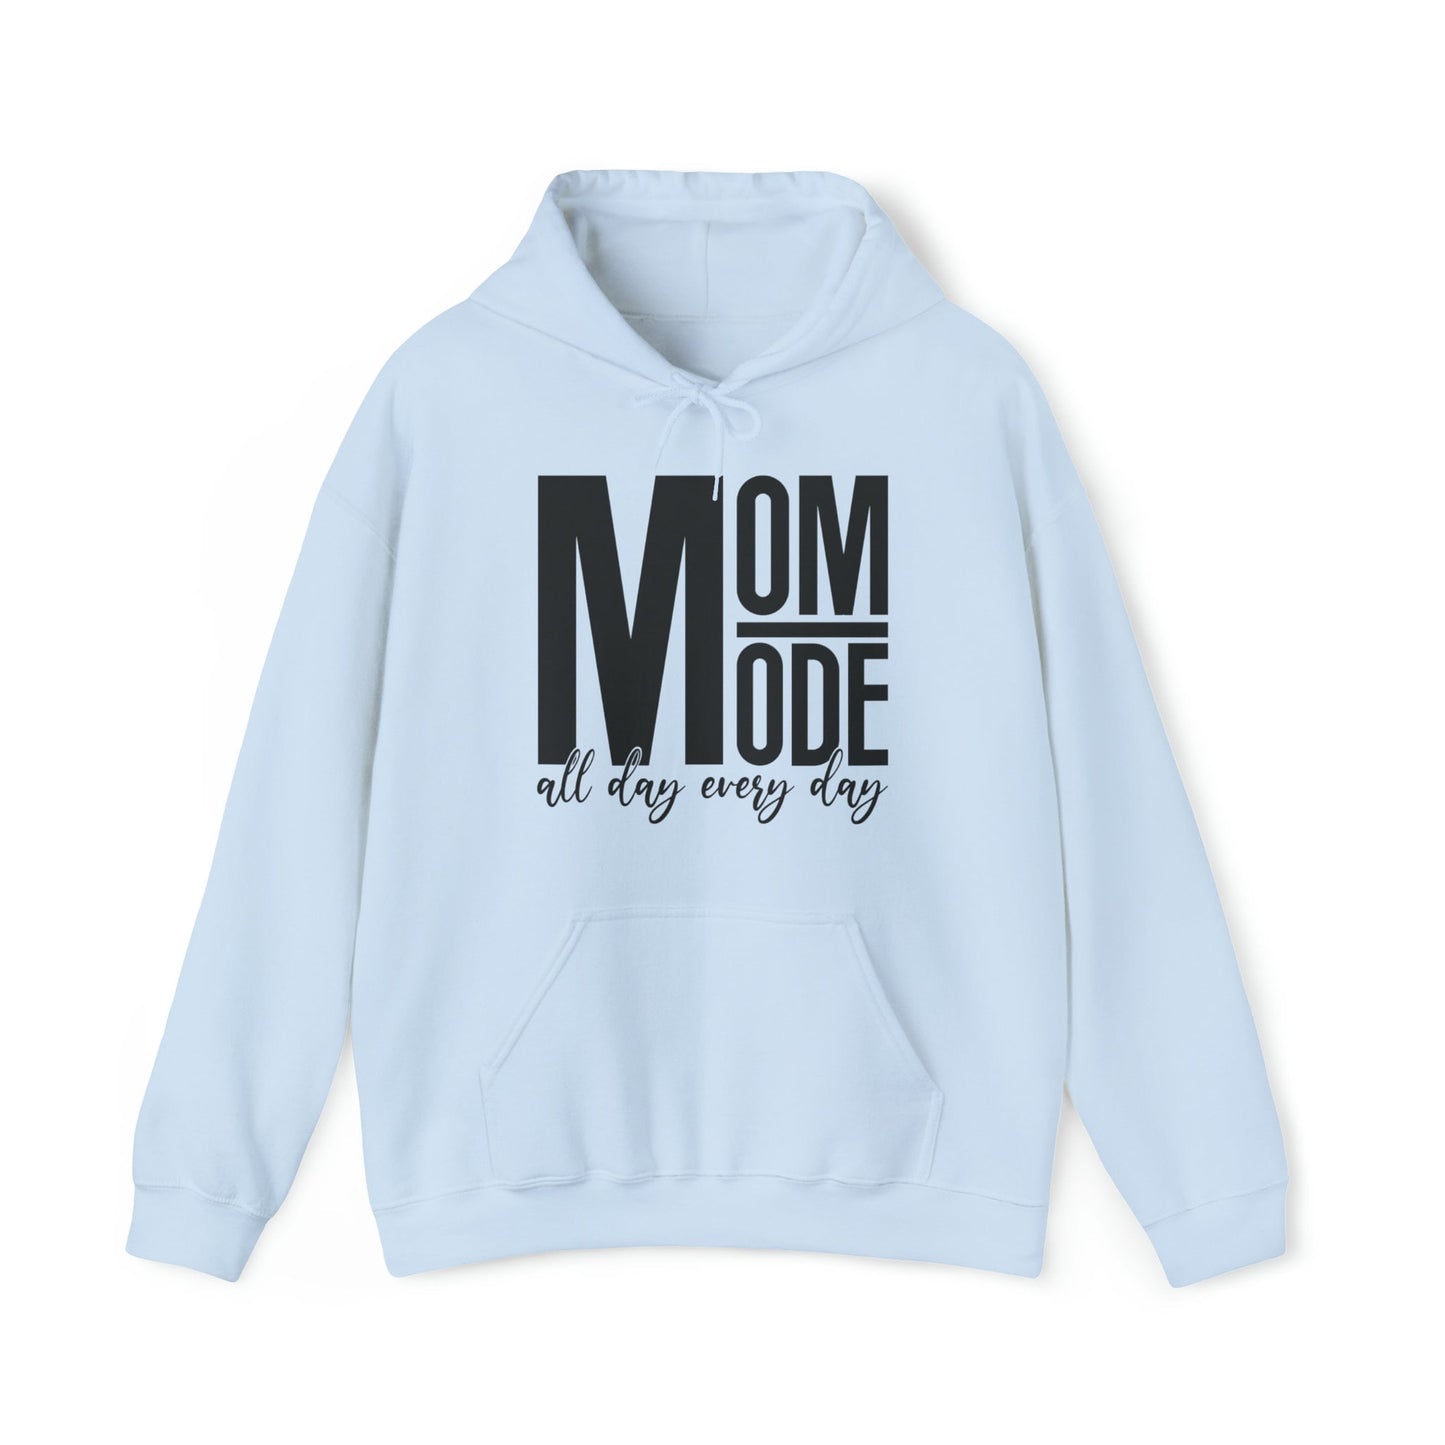 MOM Mode - All Day Every Day - Best Mom - Celebrate Mom - Strong Woman - Mom Humor - Unisex Heavy Blend™ Hooded Sweatshirt